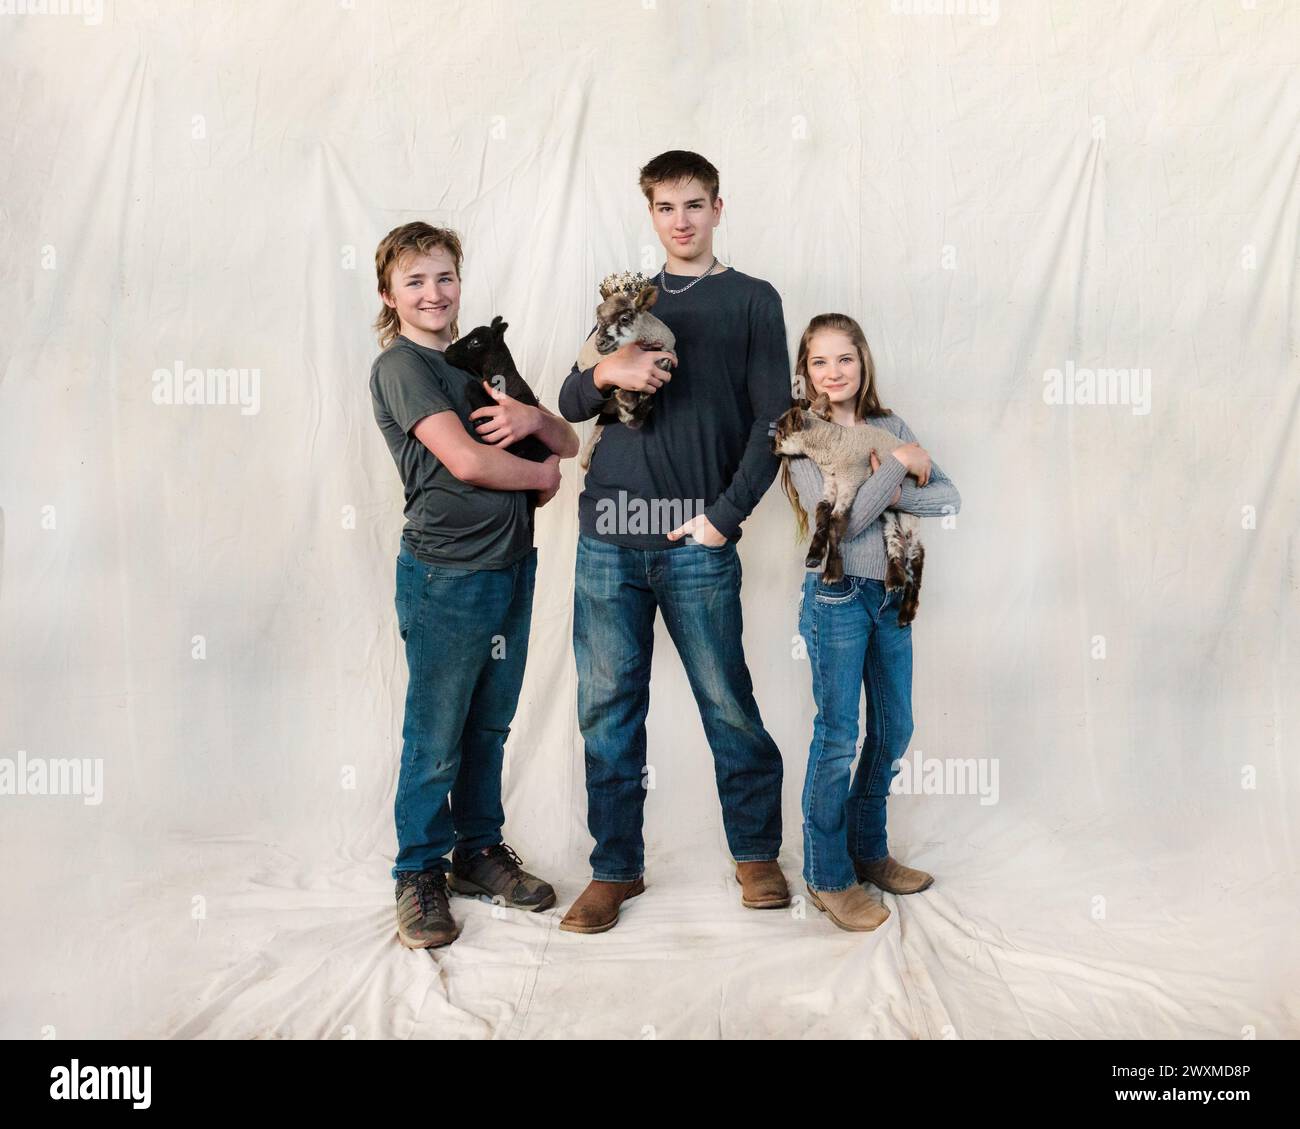 Two teen boys and one girl holding lambs. Stock Photo